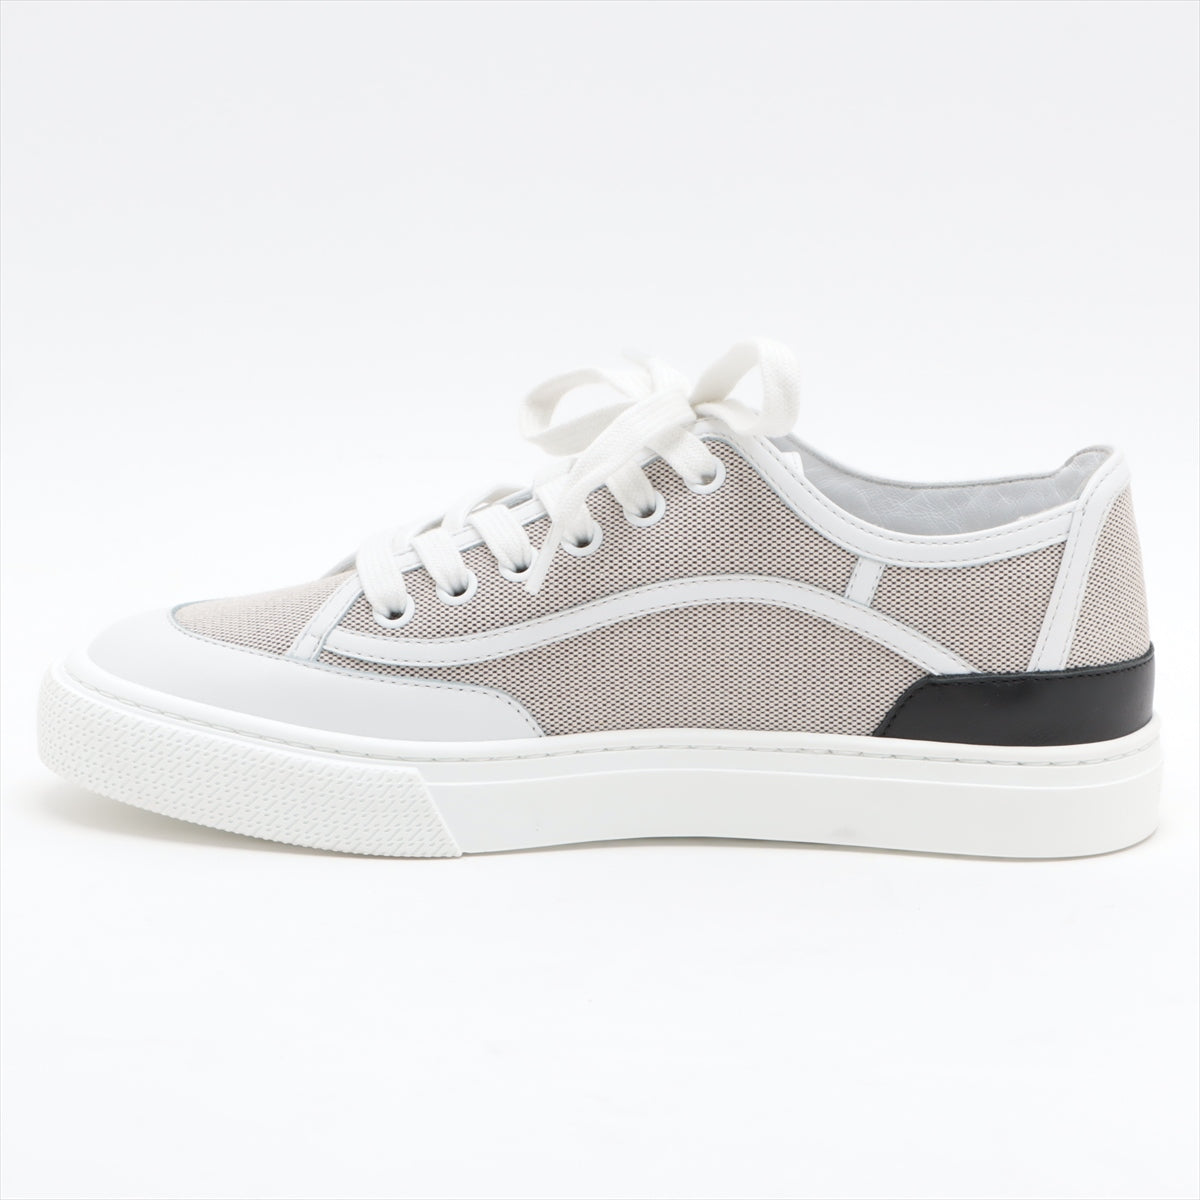 Hermès Canvas & leather Sneakers 36 Ladies' Beige x white box sack Is there a replacement string